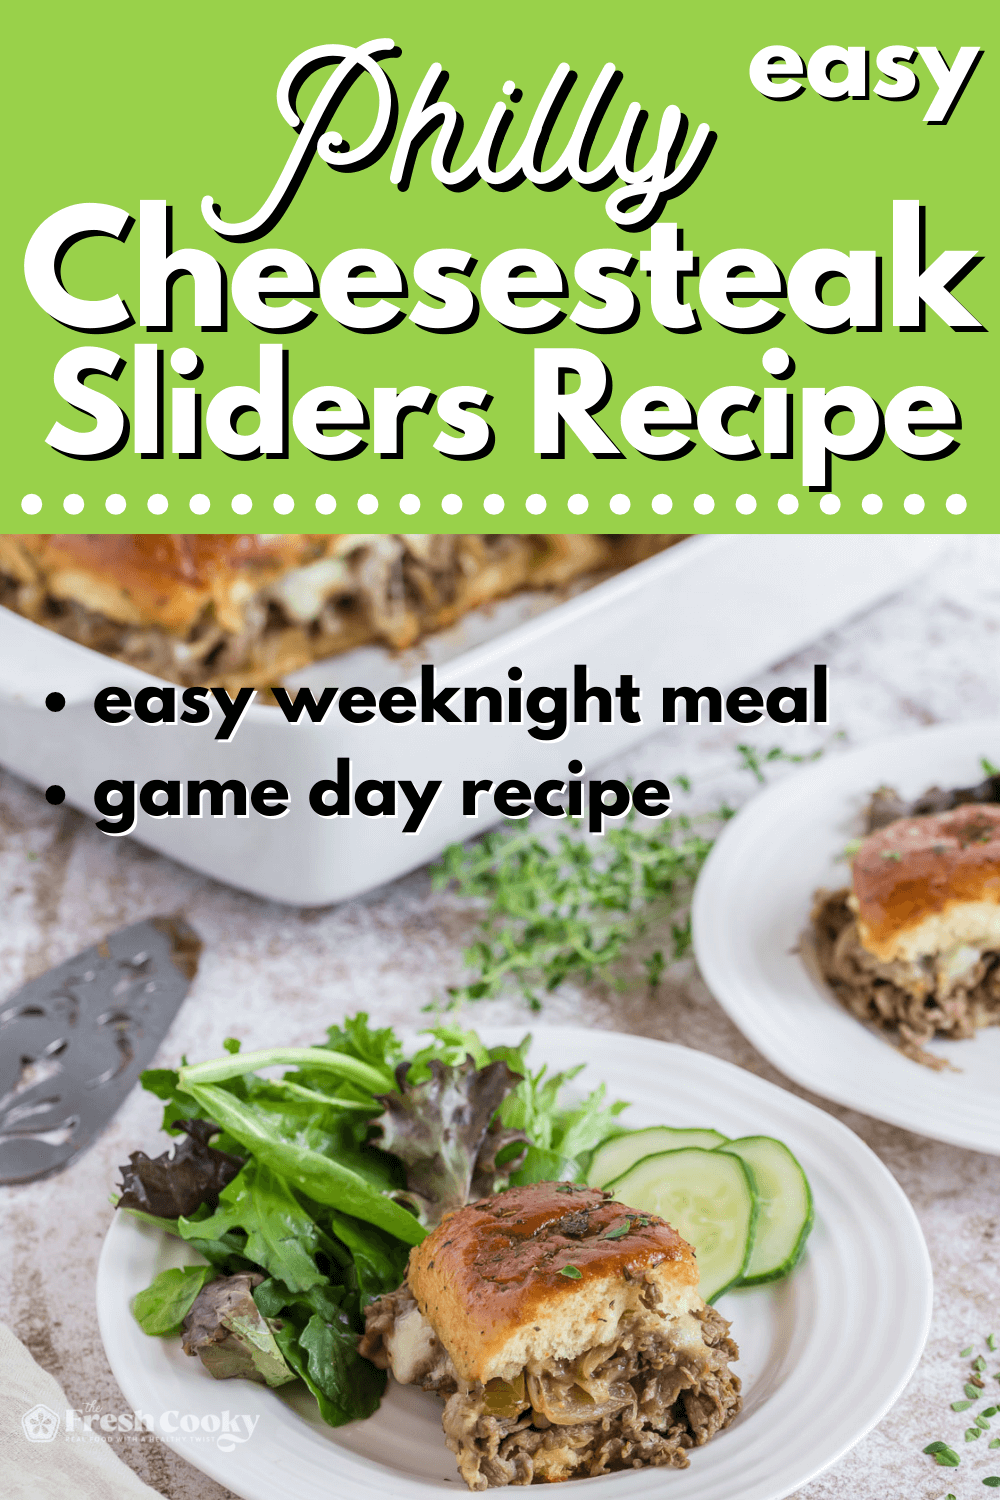 Pin for best Philly Cheesesteak sliders recipe with image of slider on plate with sides salad and cucumbers.